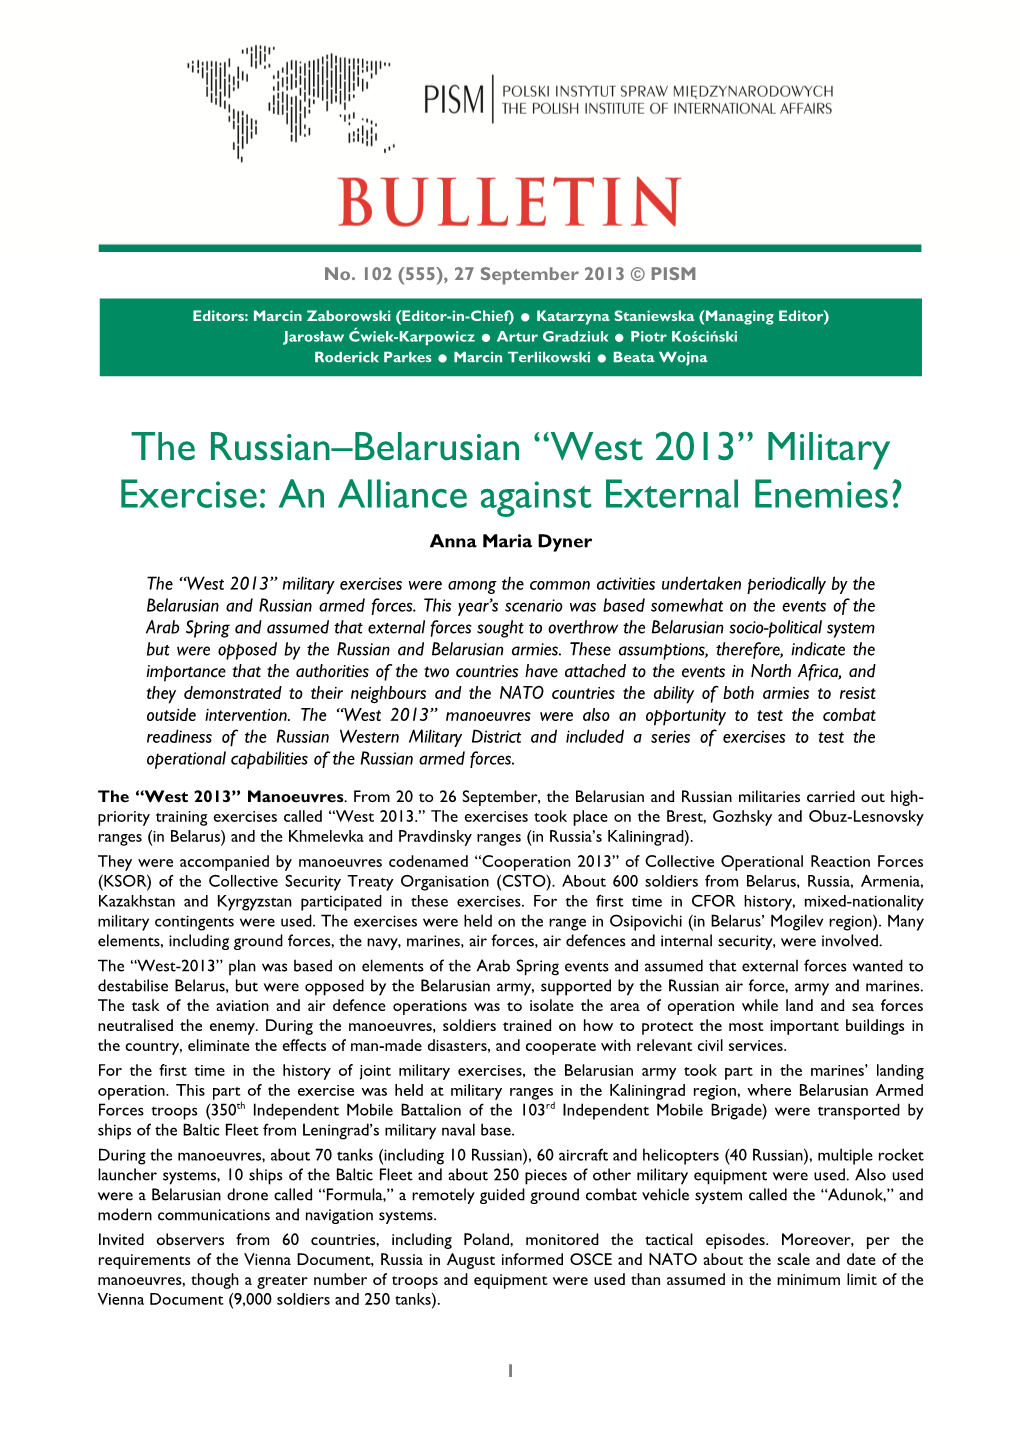 The Russian-Belarusian "West 2013" Military Exercise